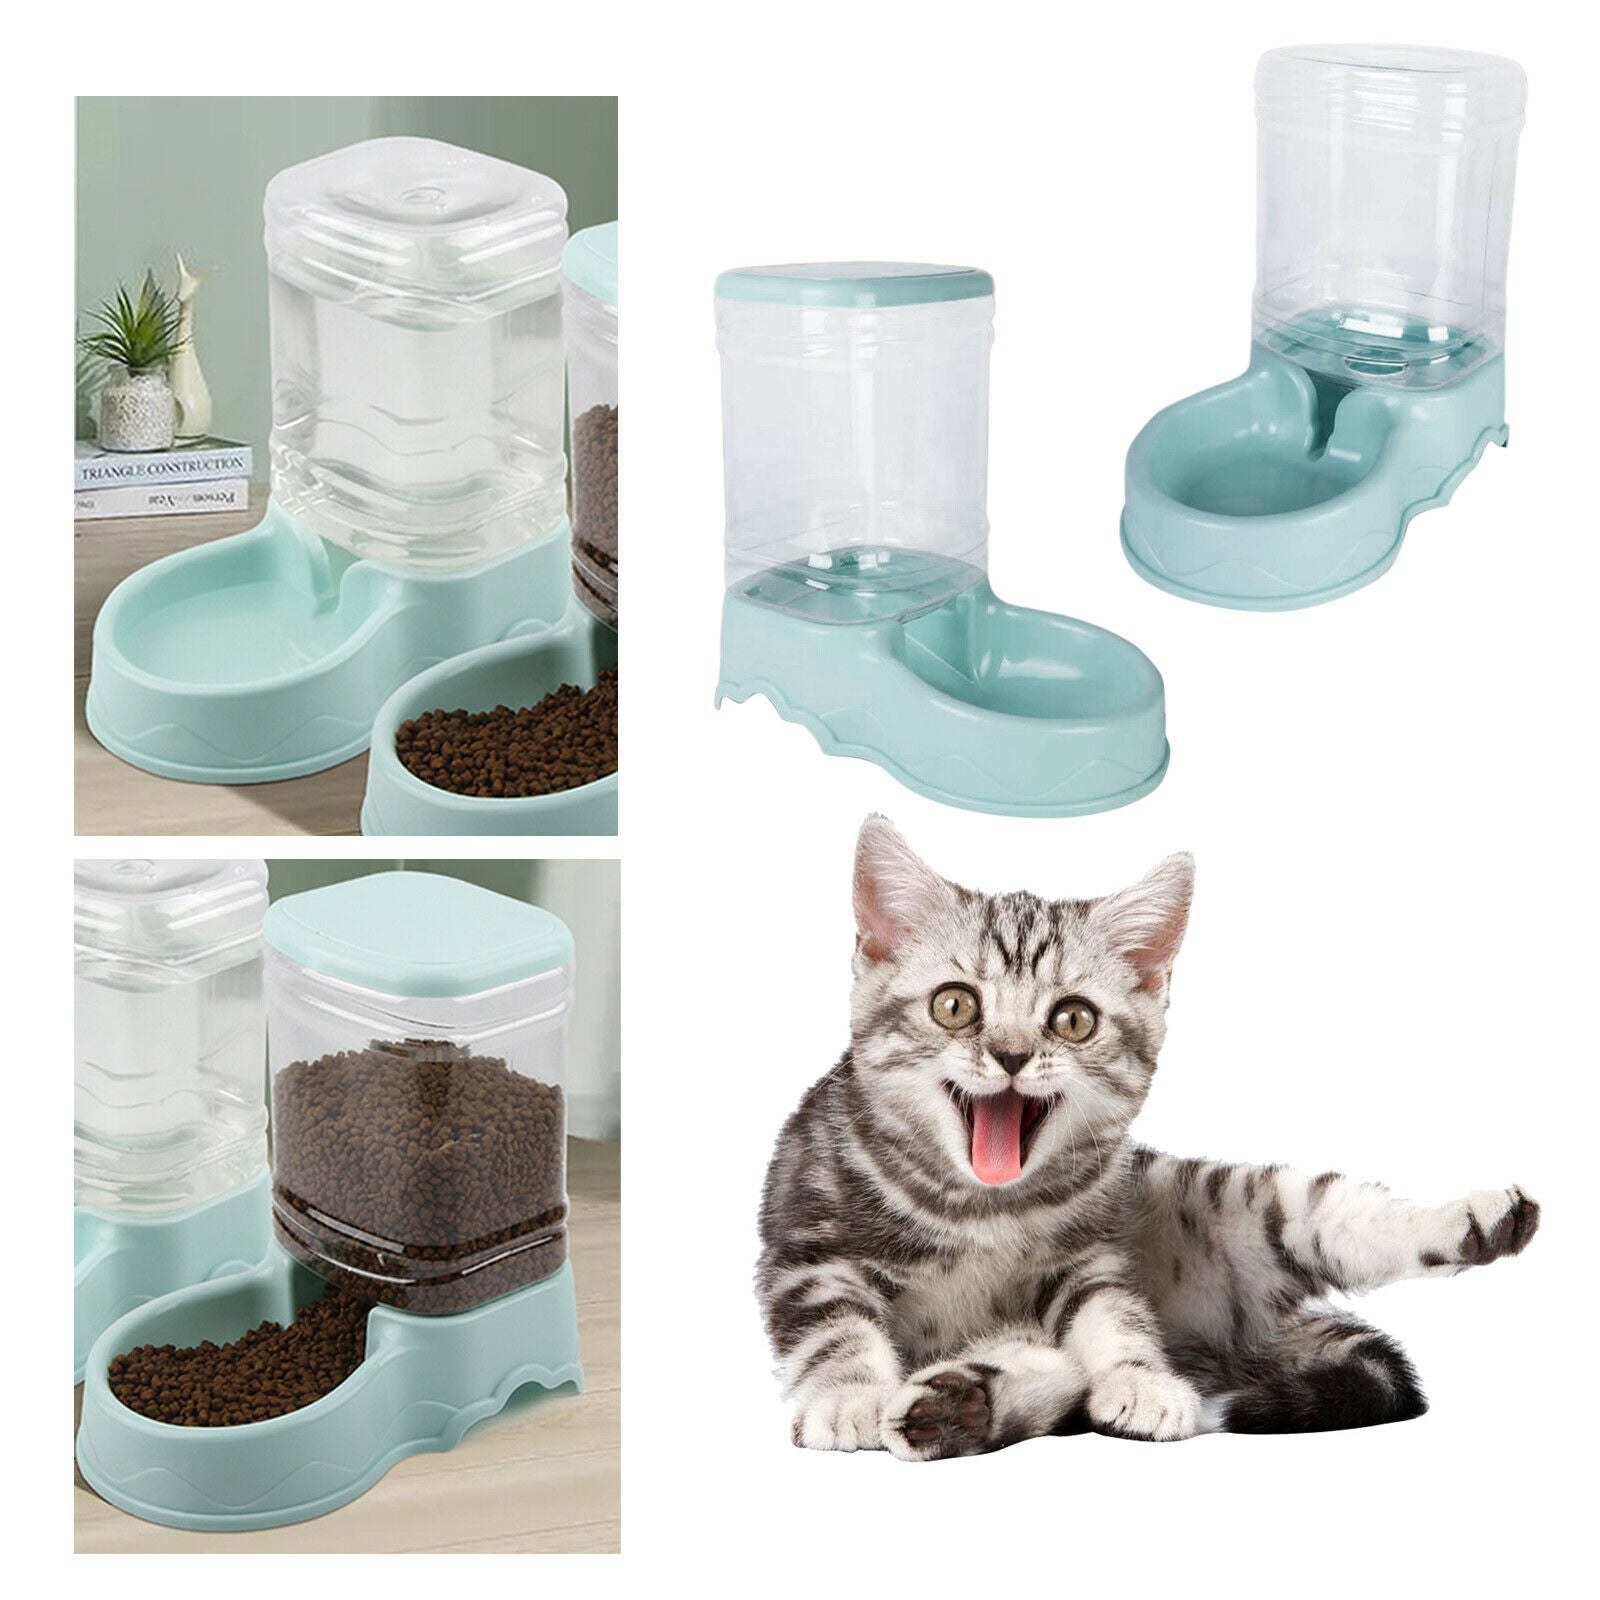 2 2pcs 3.5L Automatic Pet Feeder Cats Large Water Feeder WATER DISPENSER